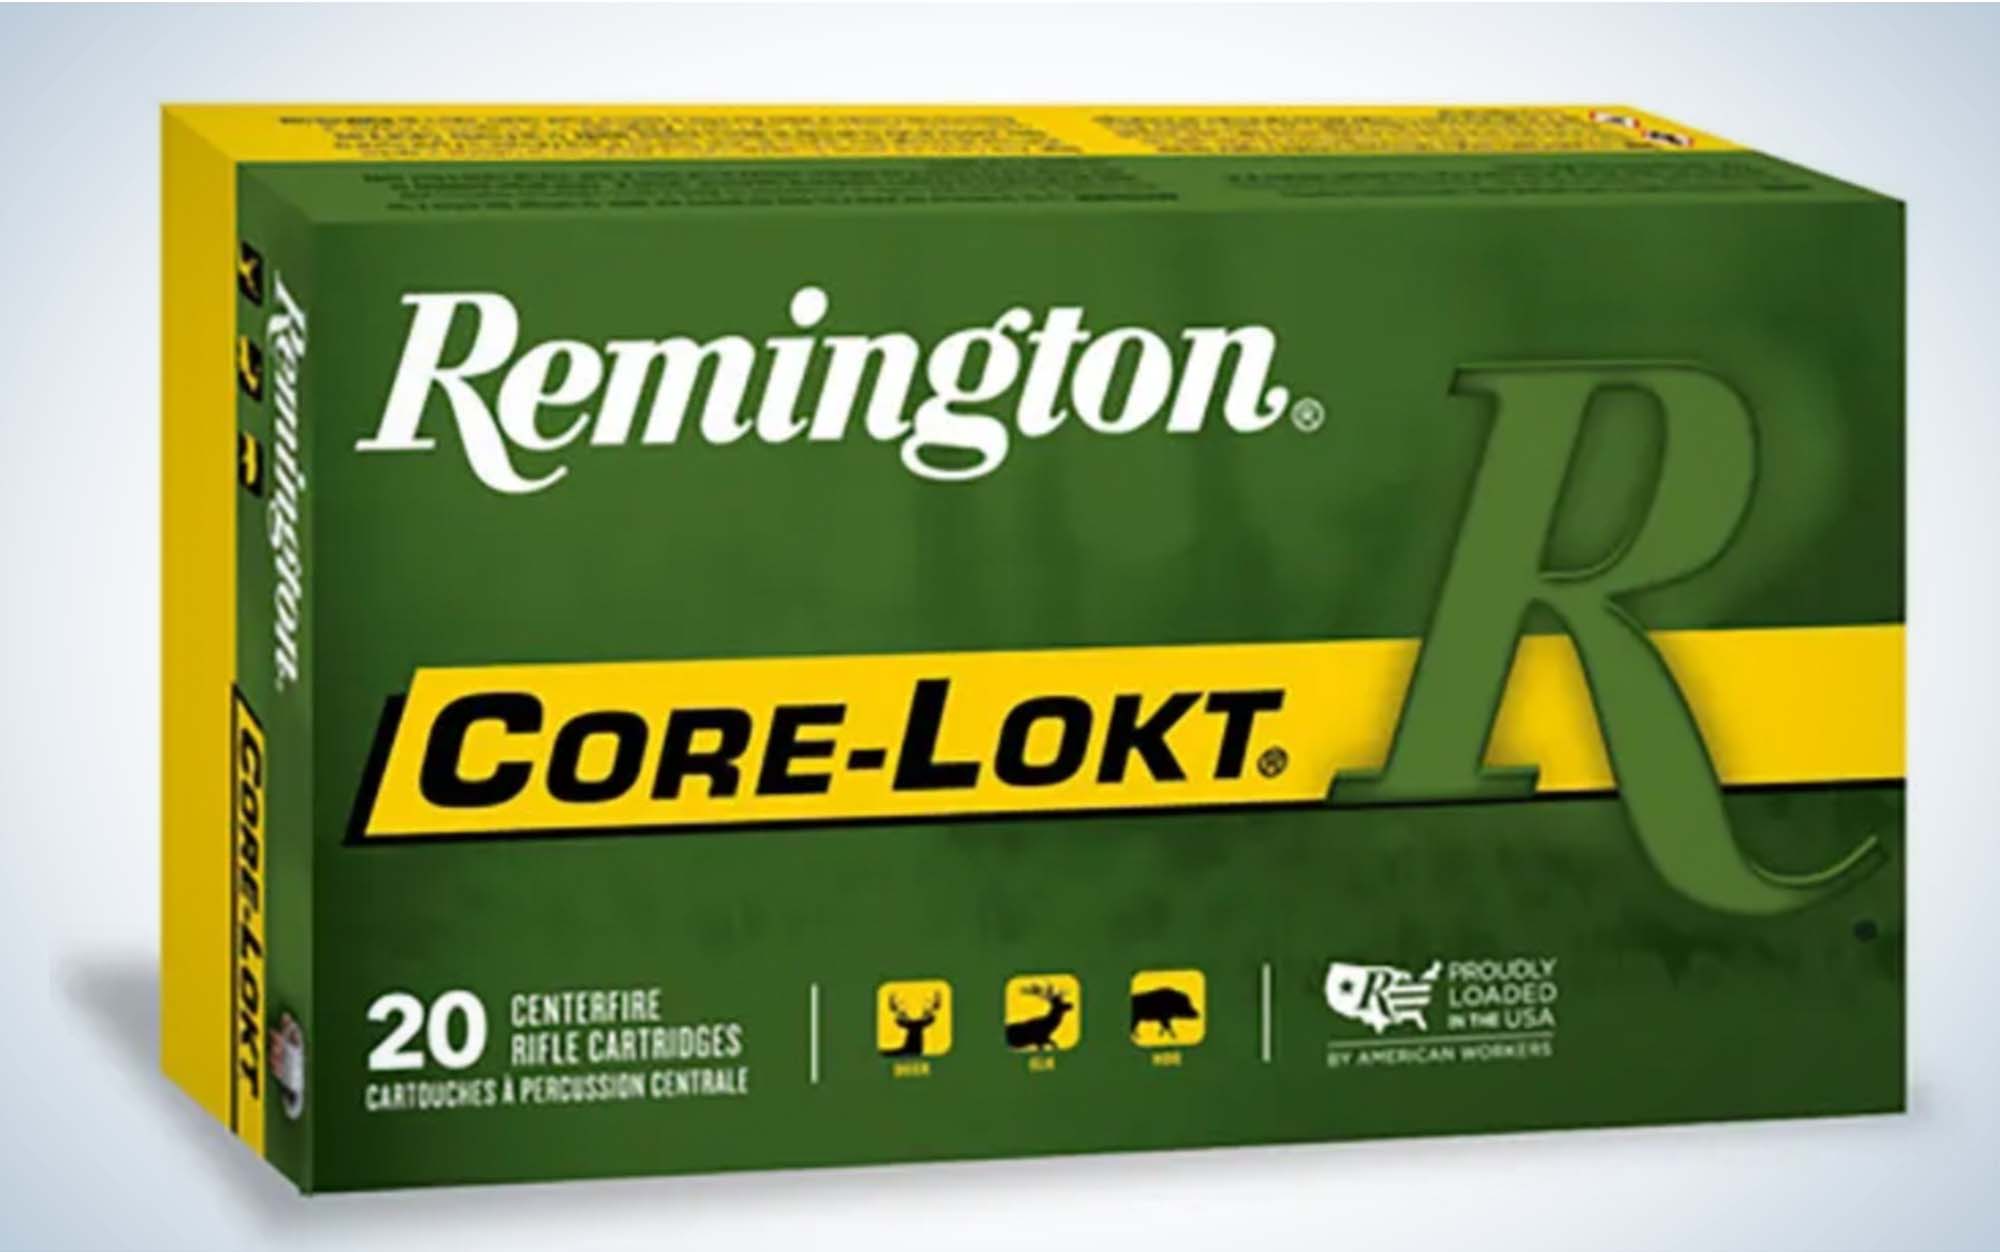 remington core-lokt is one of the best bear ammo